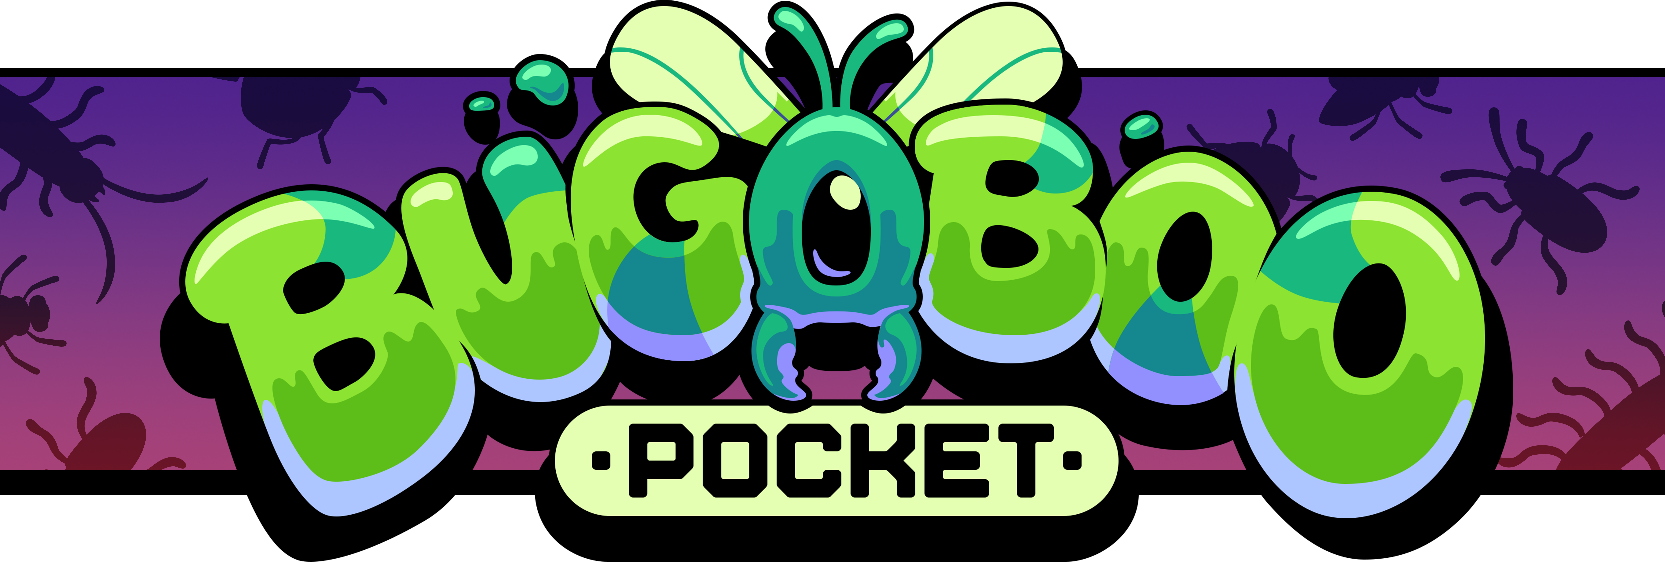 Play My pocket pet for free without downloads